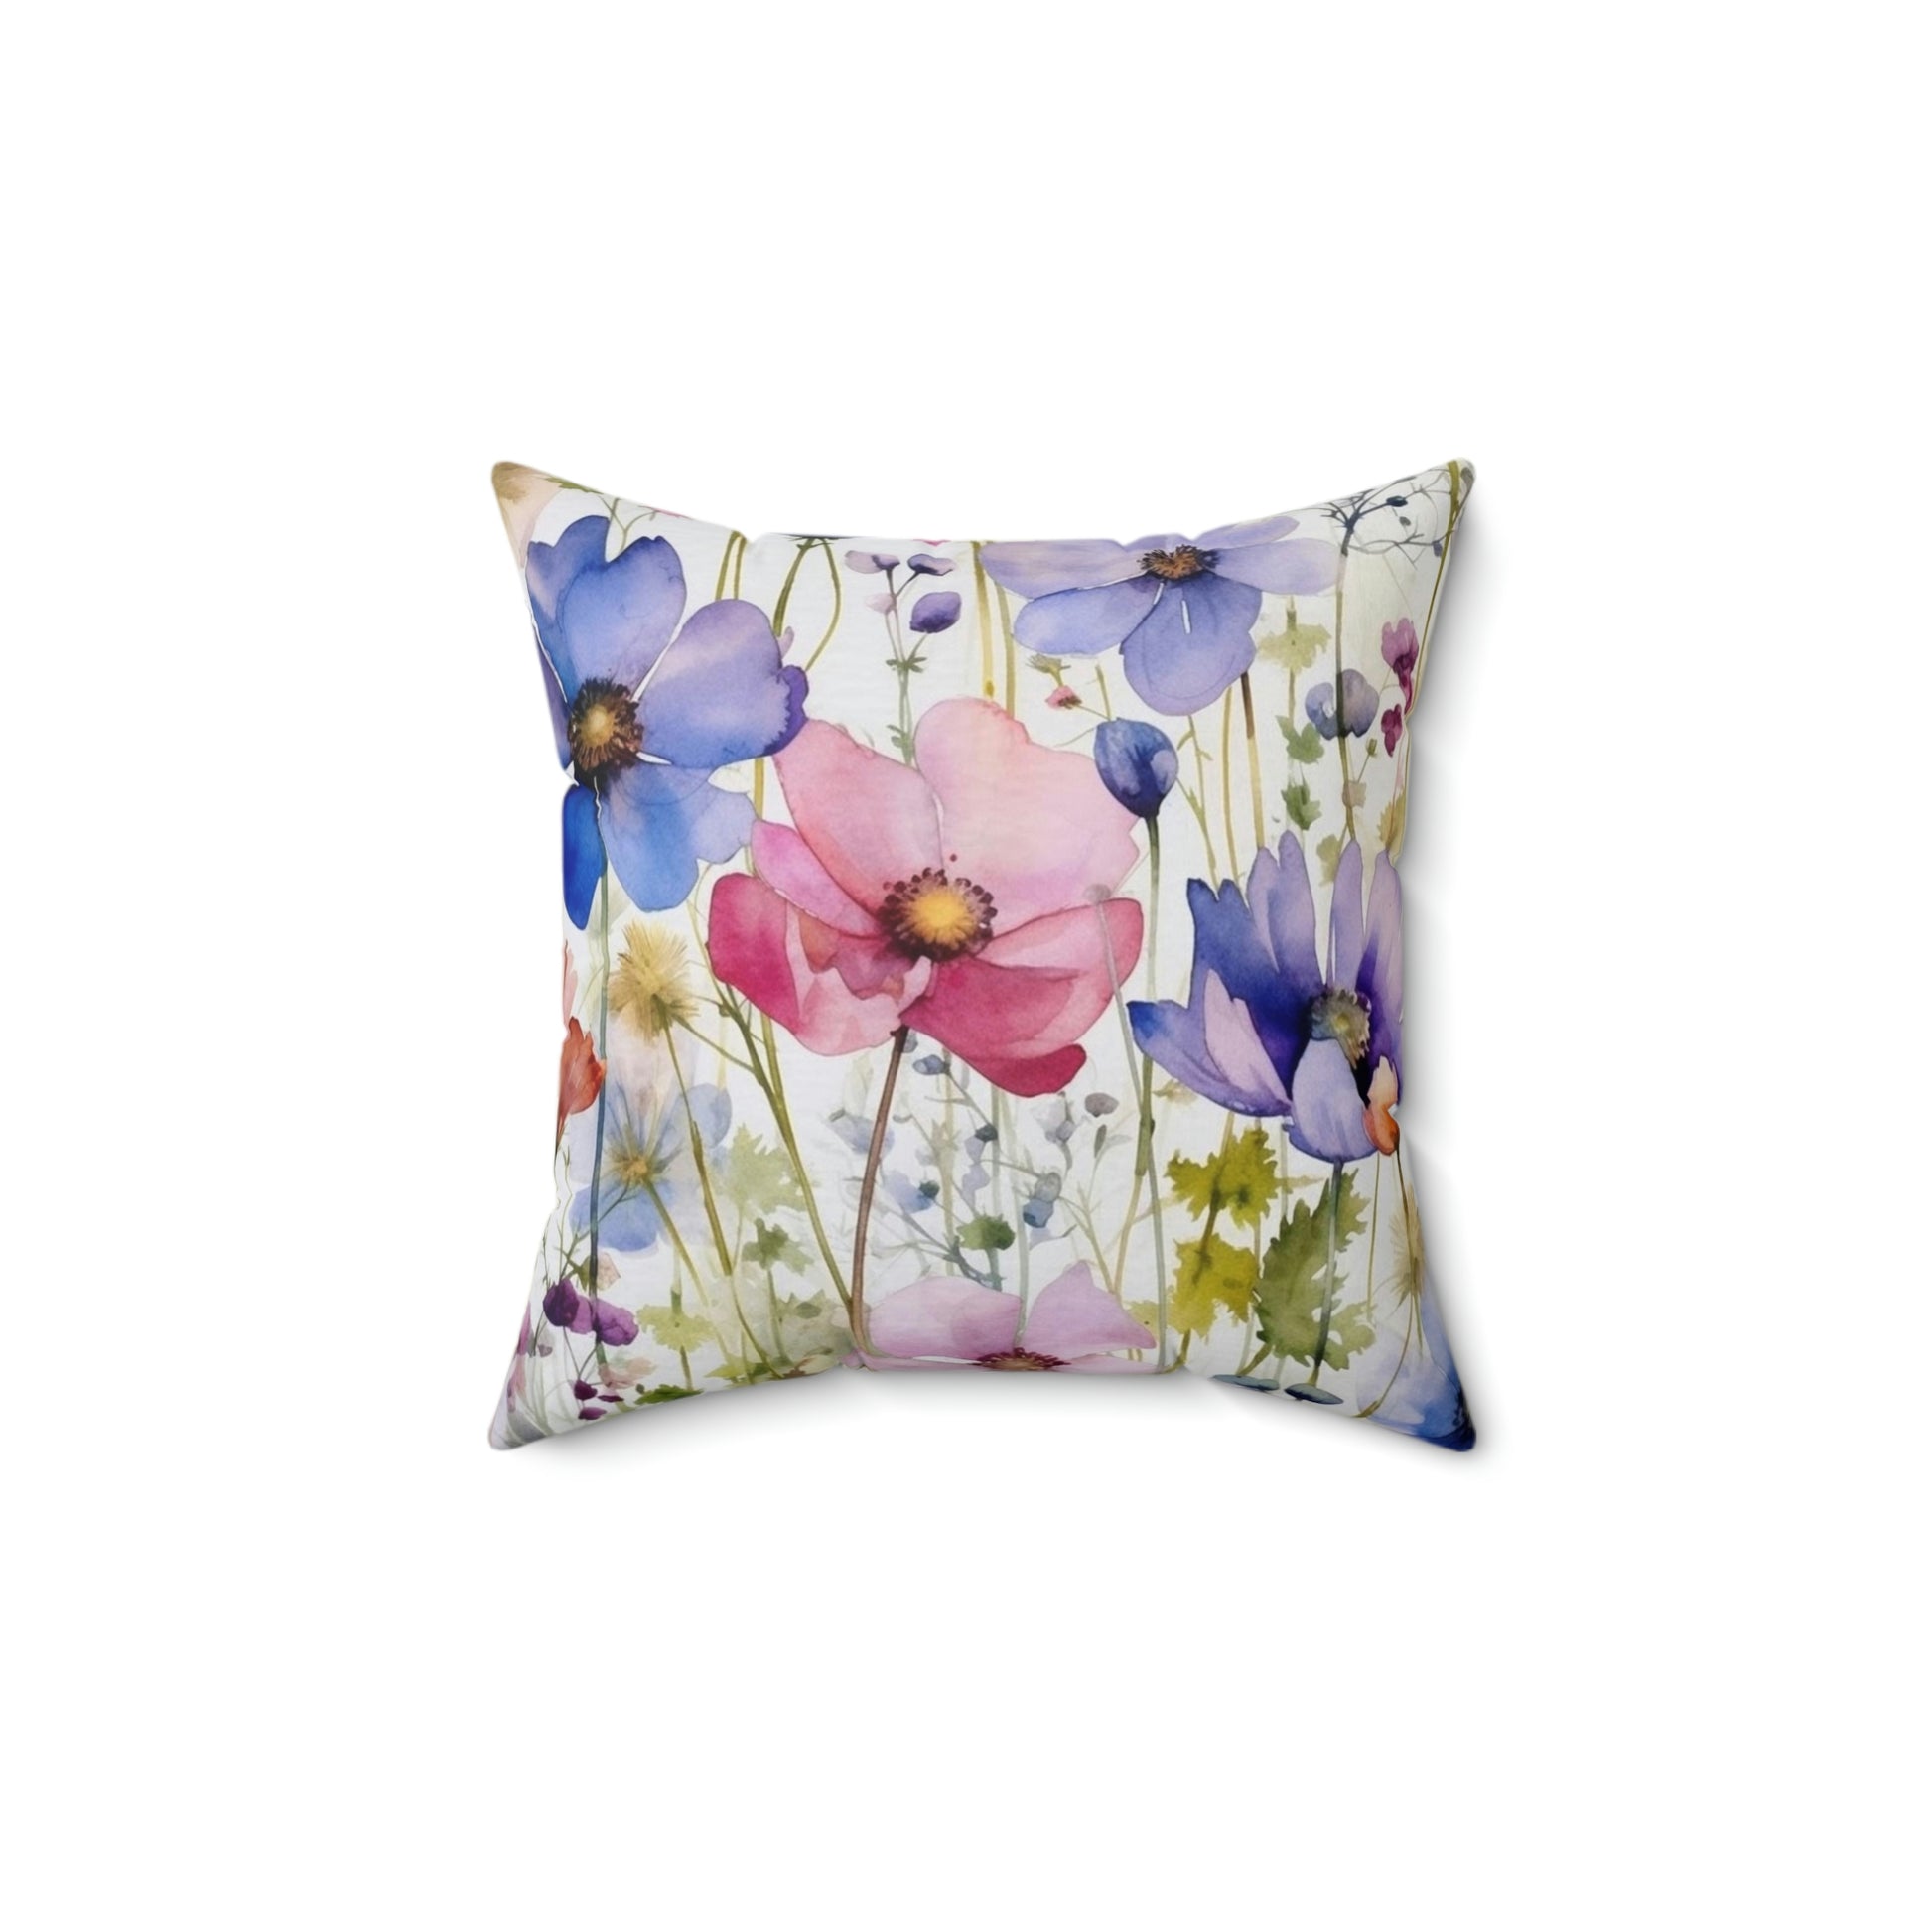 Wildflowers Filled Pillow with Insert, Watercolor Floral Square Throw Accent Decorative Room Decor Floor Sofa Couch Cushion Starcove Fashion